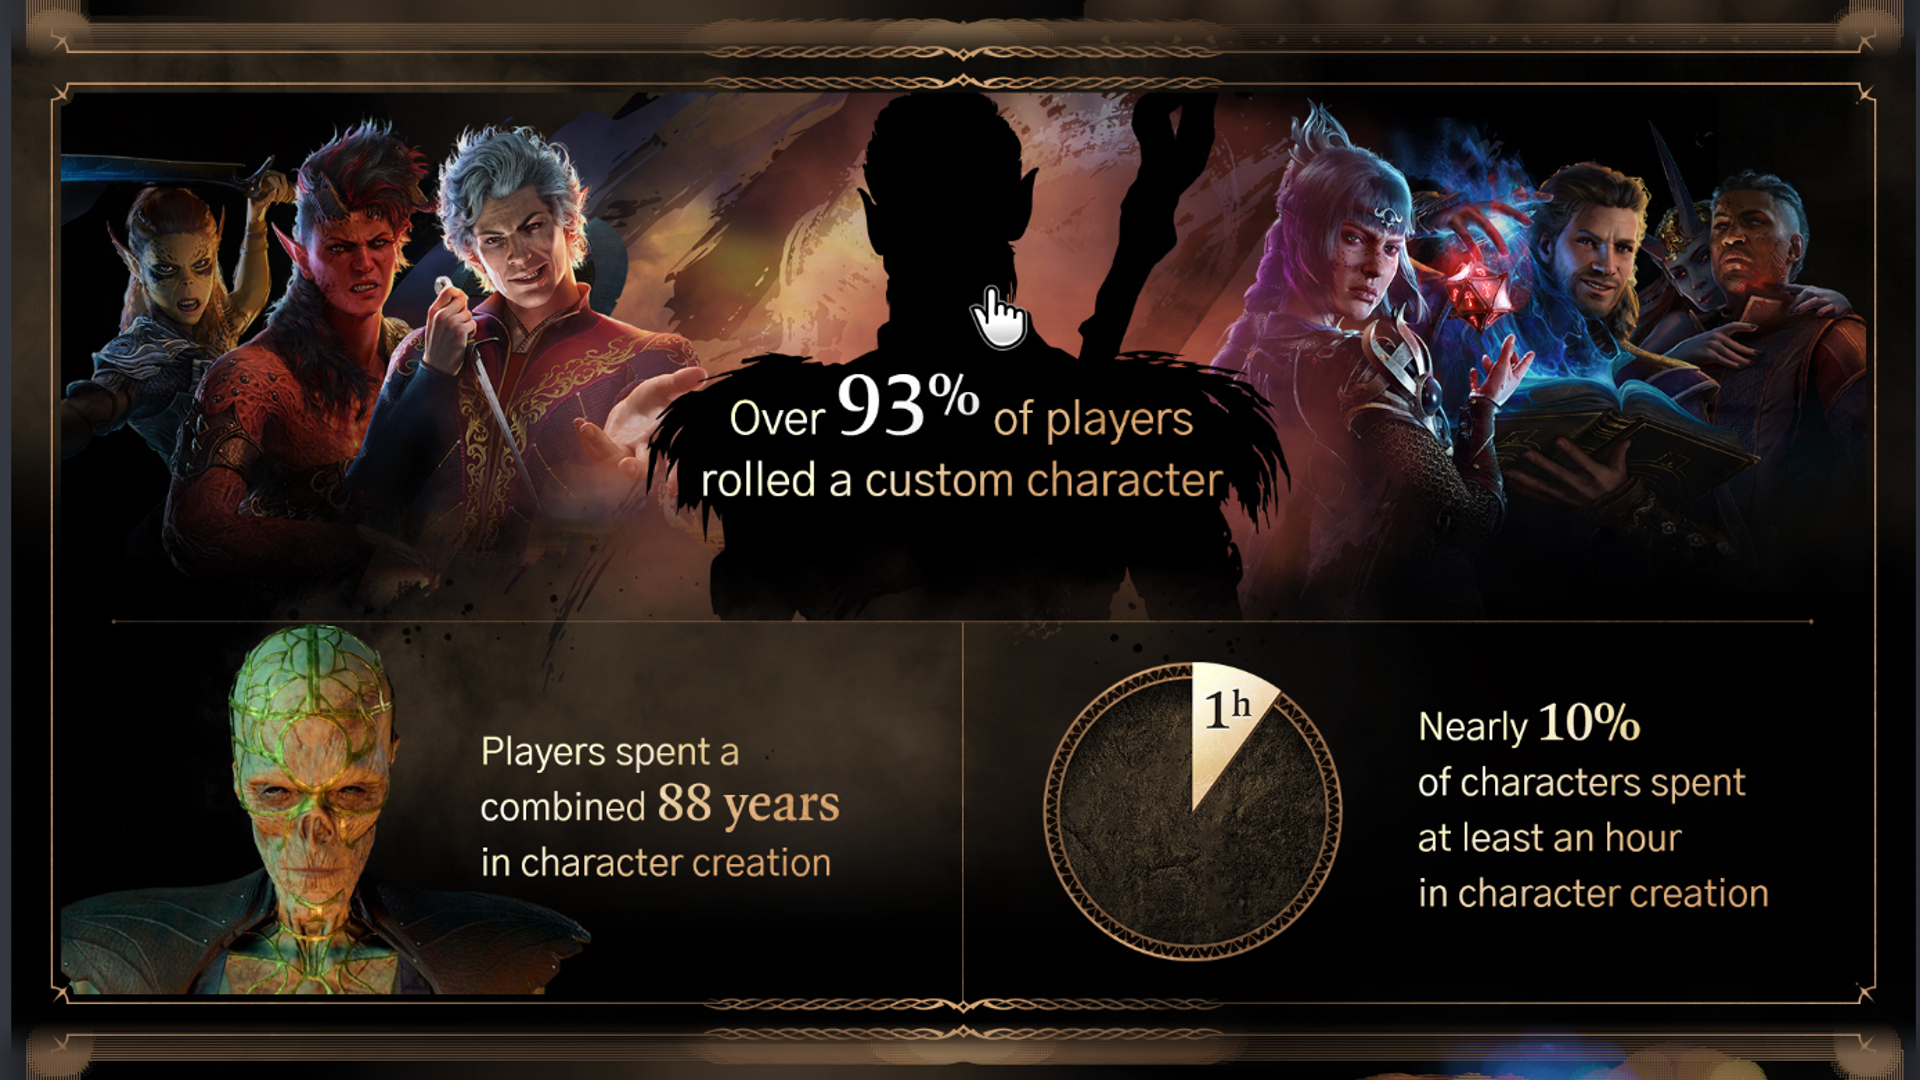 A screenshot of the Baldur's Gate 3 statistics showing how many players spent over an hour in character creation